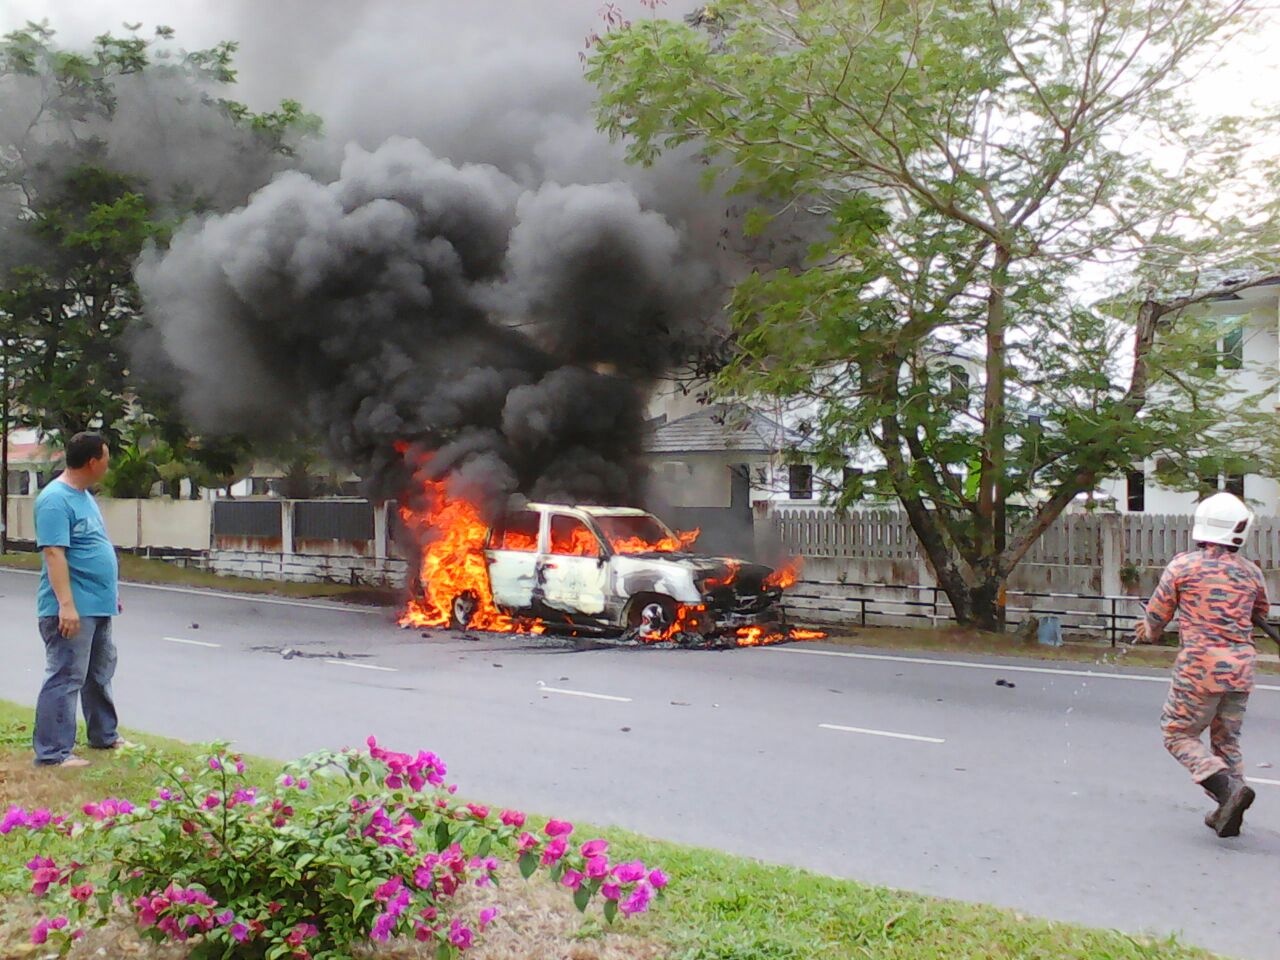 The car is seen ablaze at the roadside.